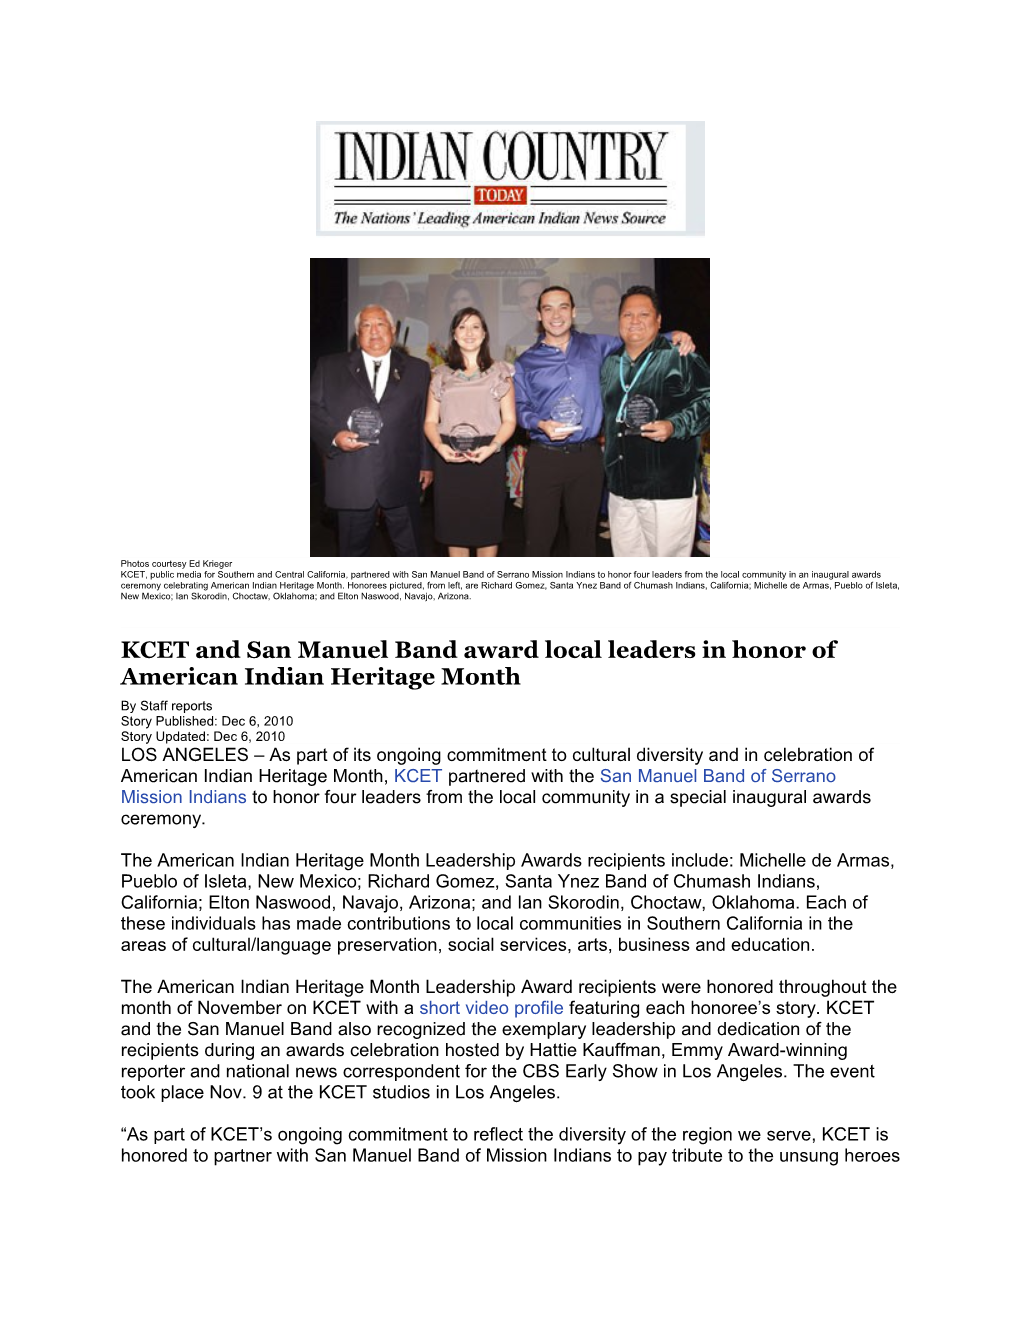 KCET and San Manuel Band Award Local Leaders in Honor of American Indian Heritage Month